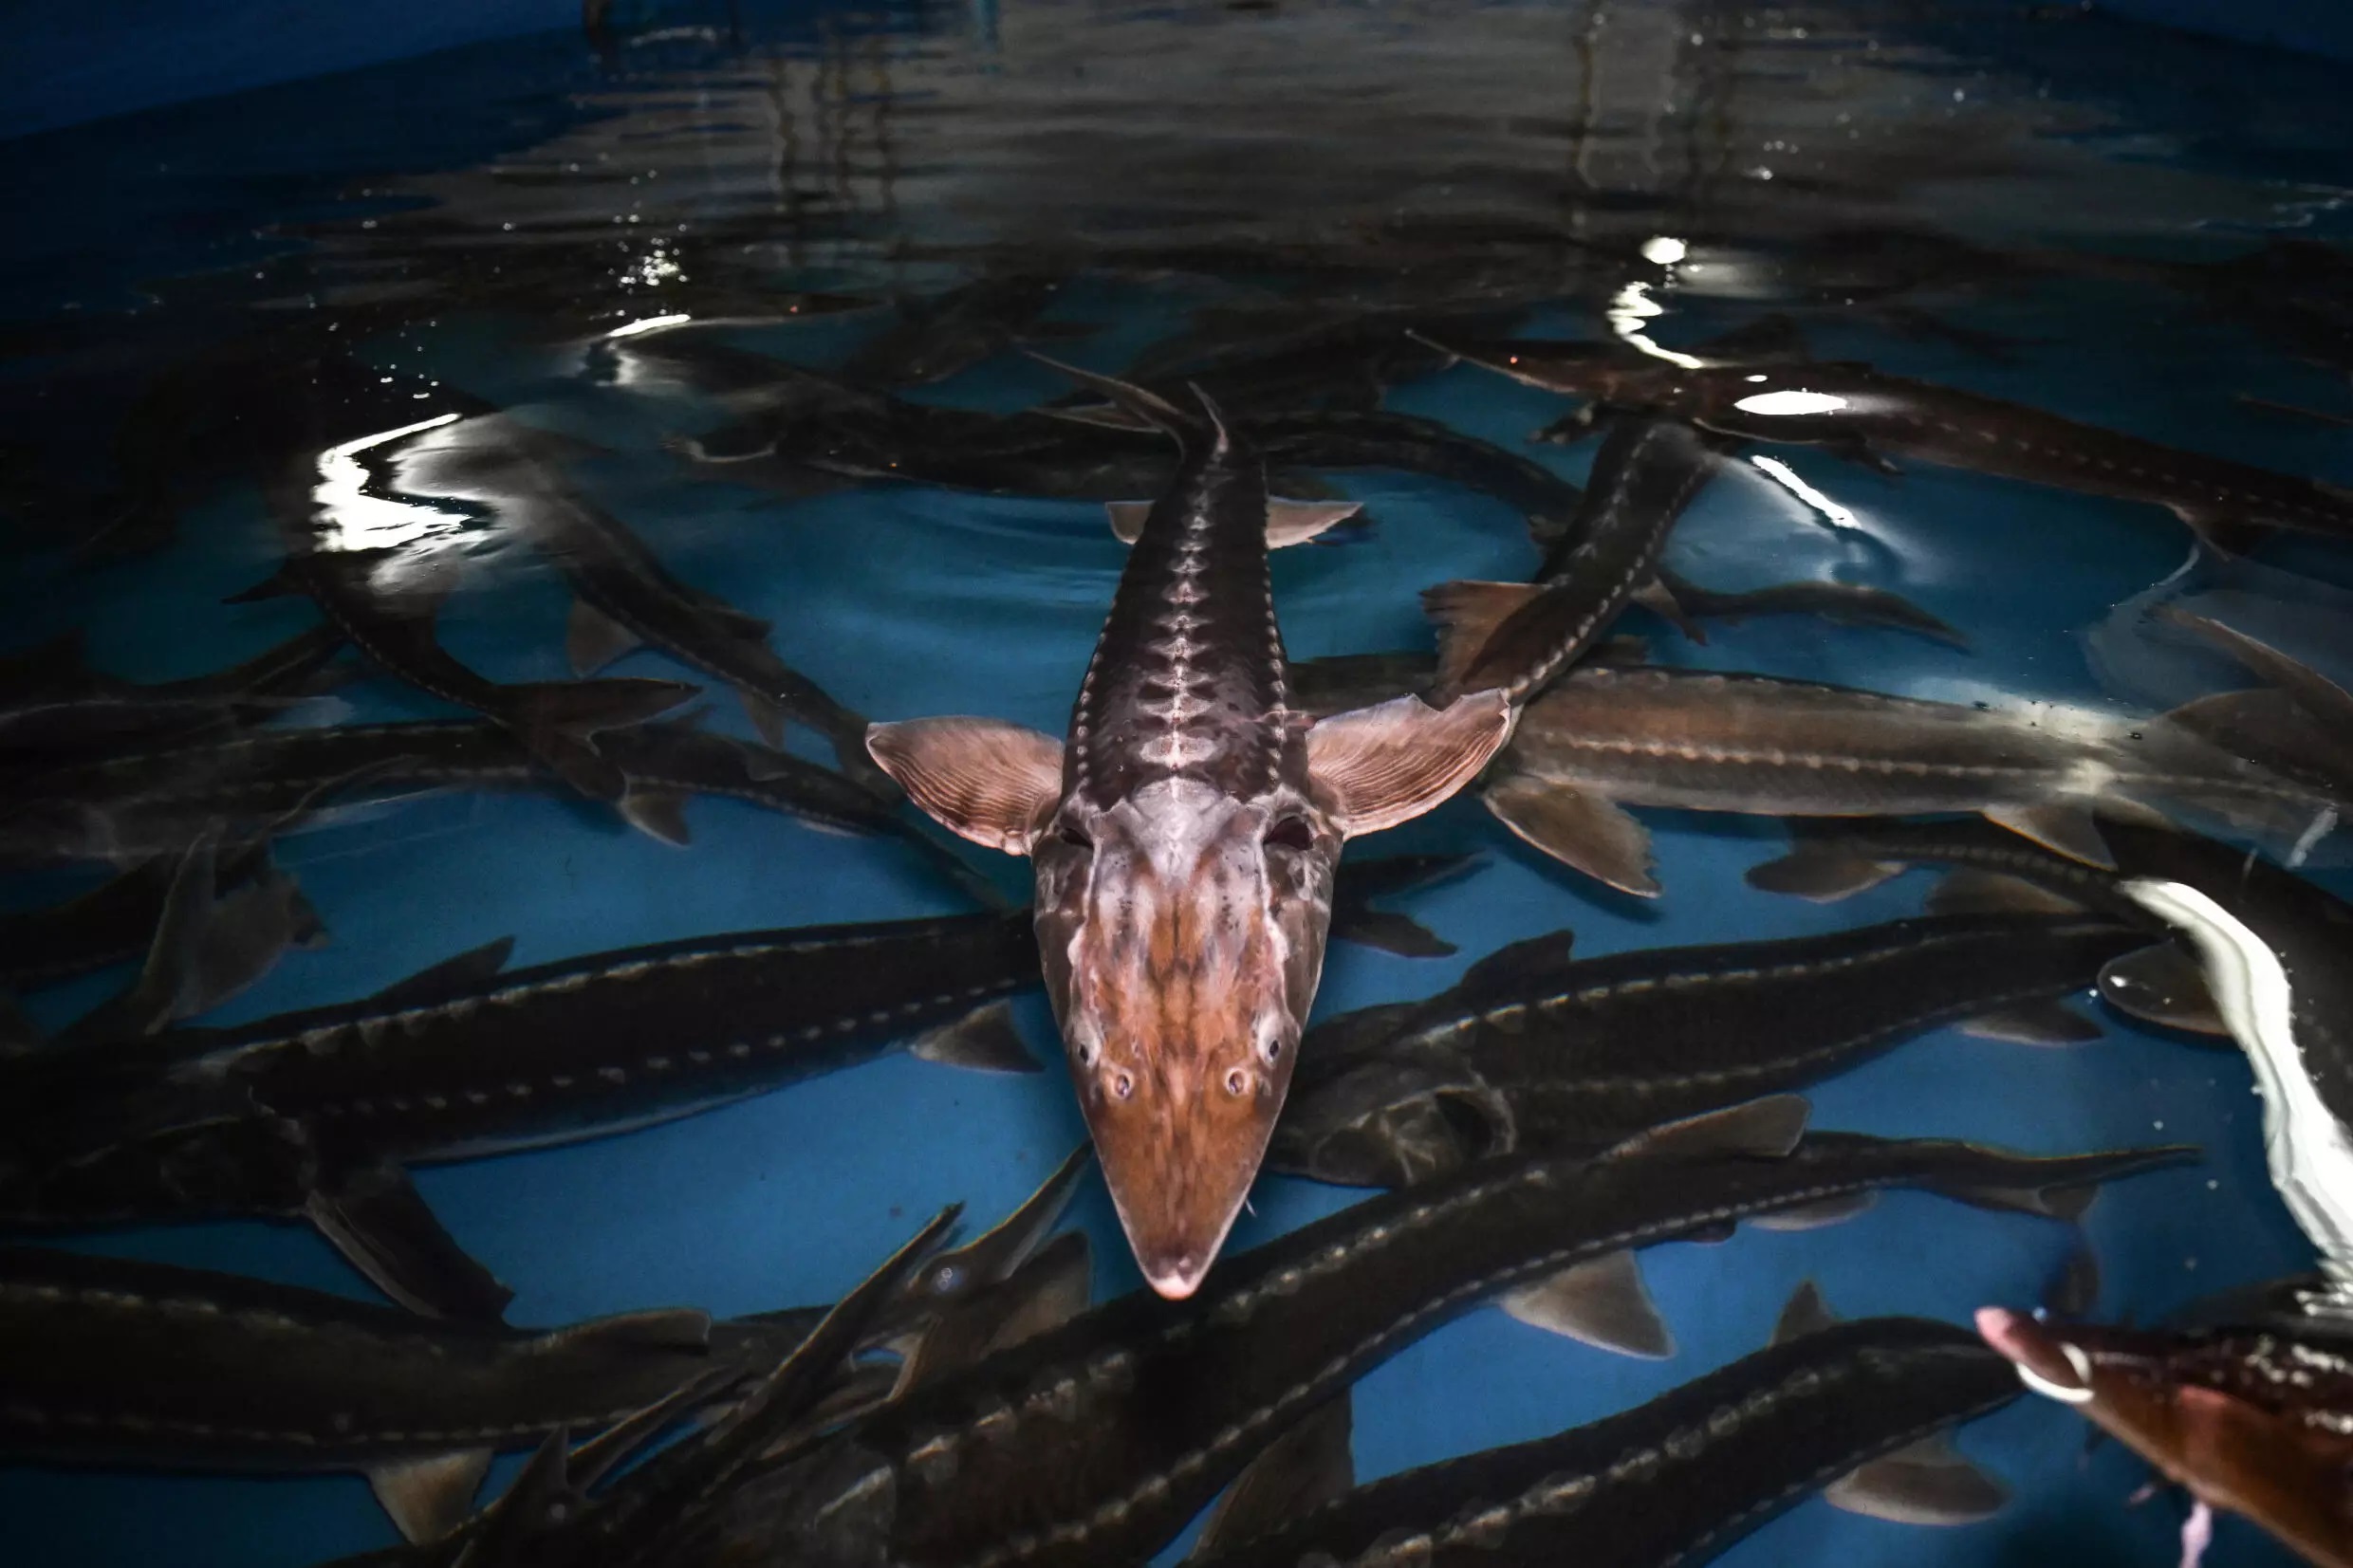 Sturgeon, here seen at a fish farm in Thailand, are now at risk of extinction. Photo: Lillian SUWANRUMPHA / AFP